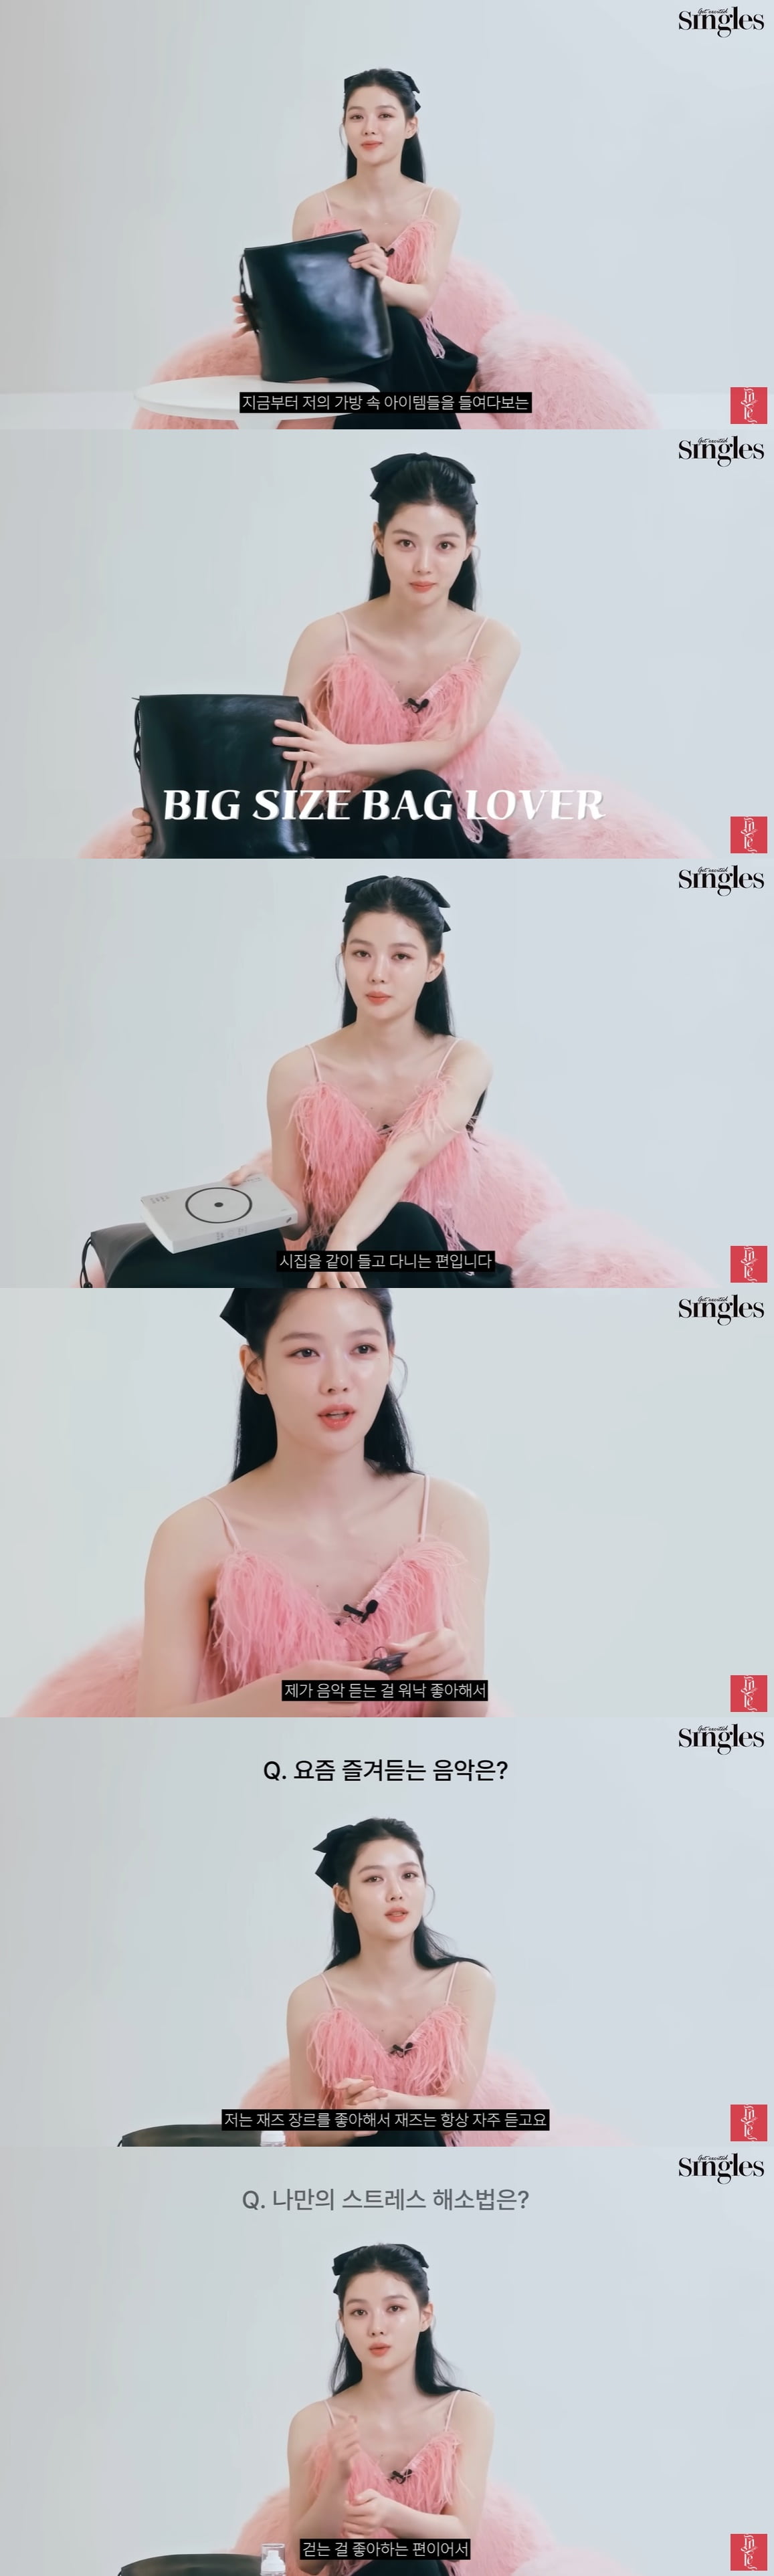 Kim Yoo-jung, unstoppable love for jelly